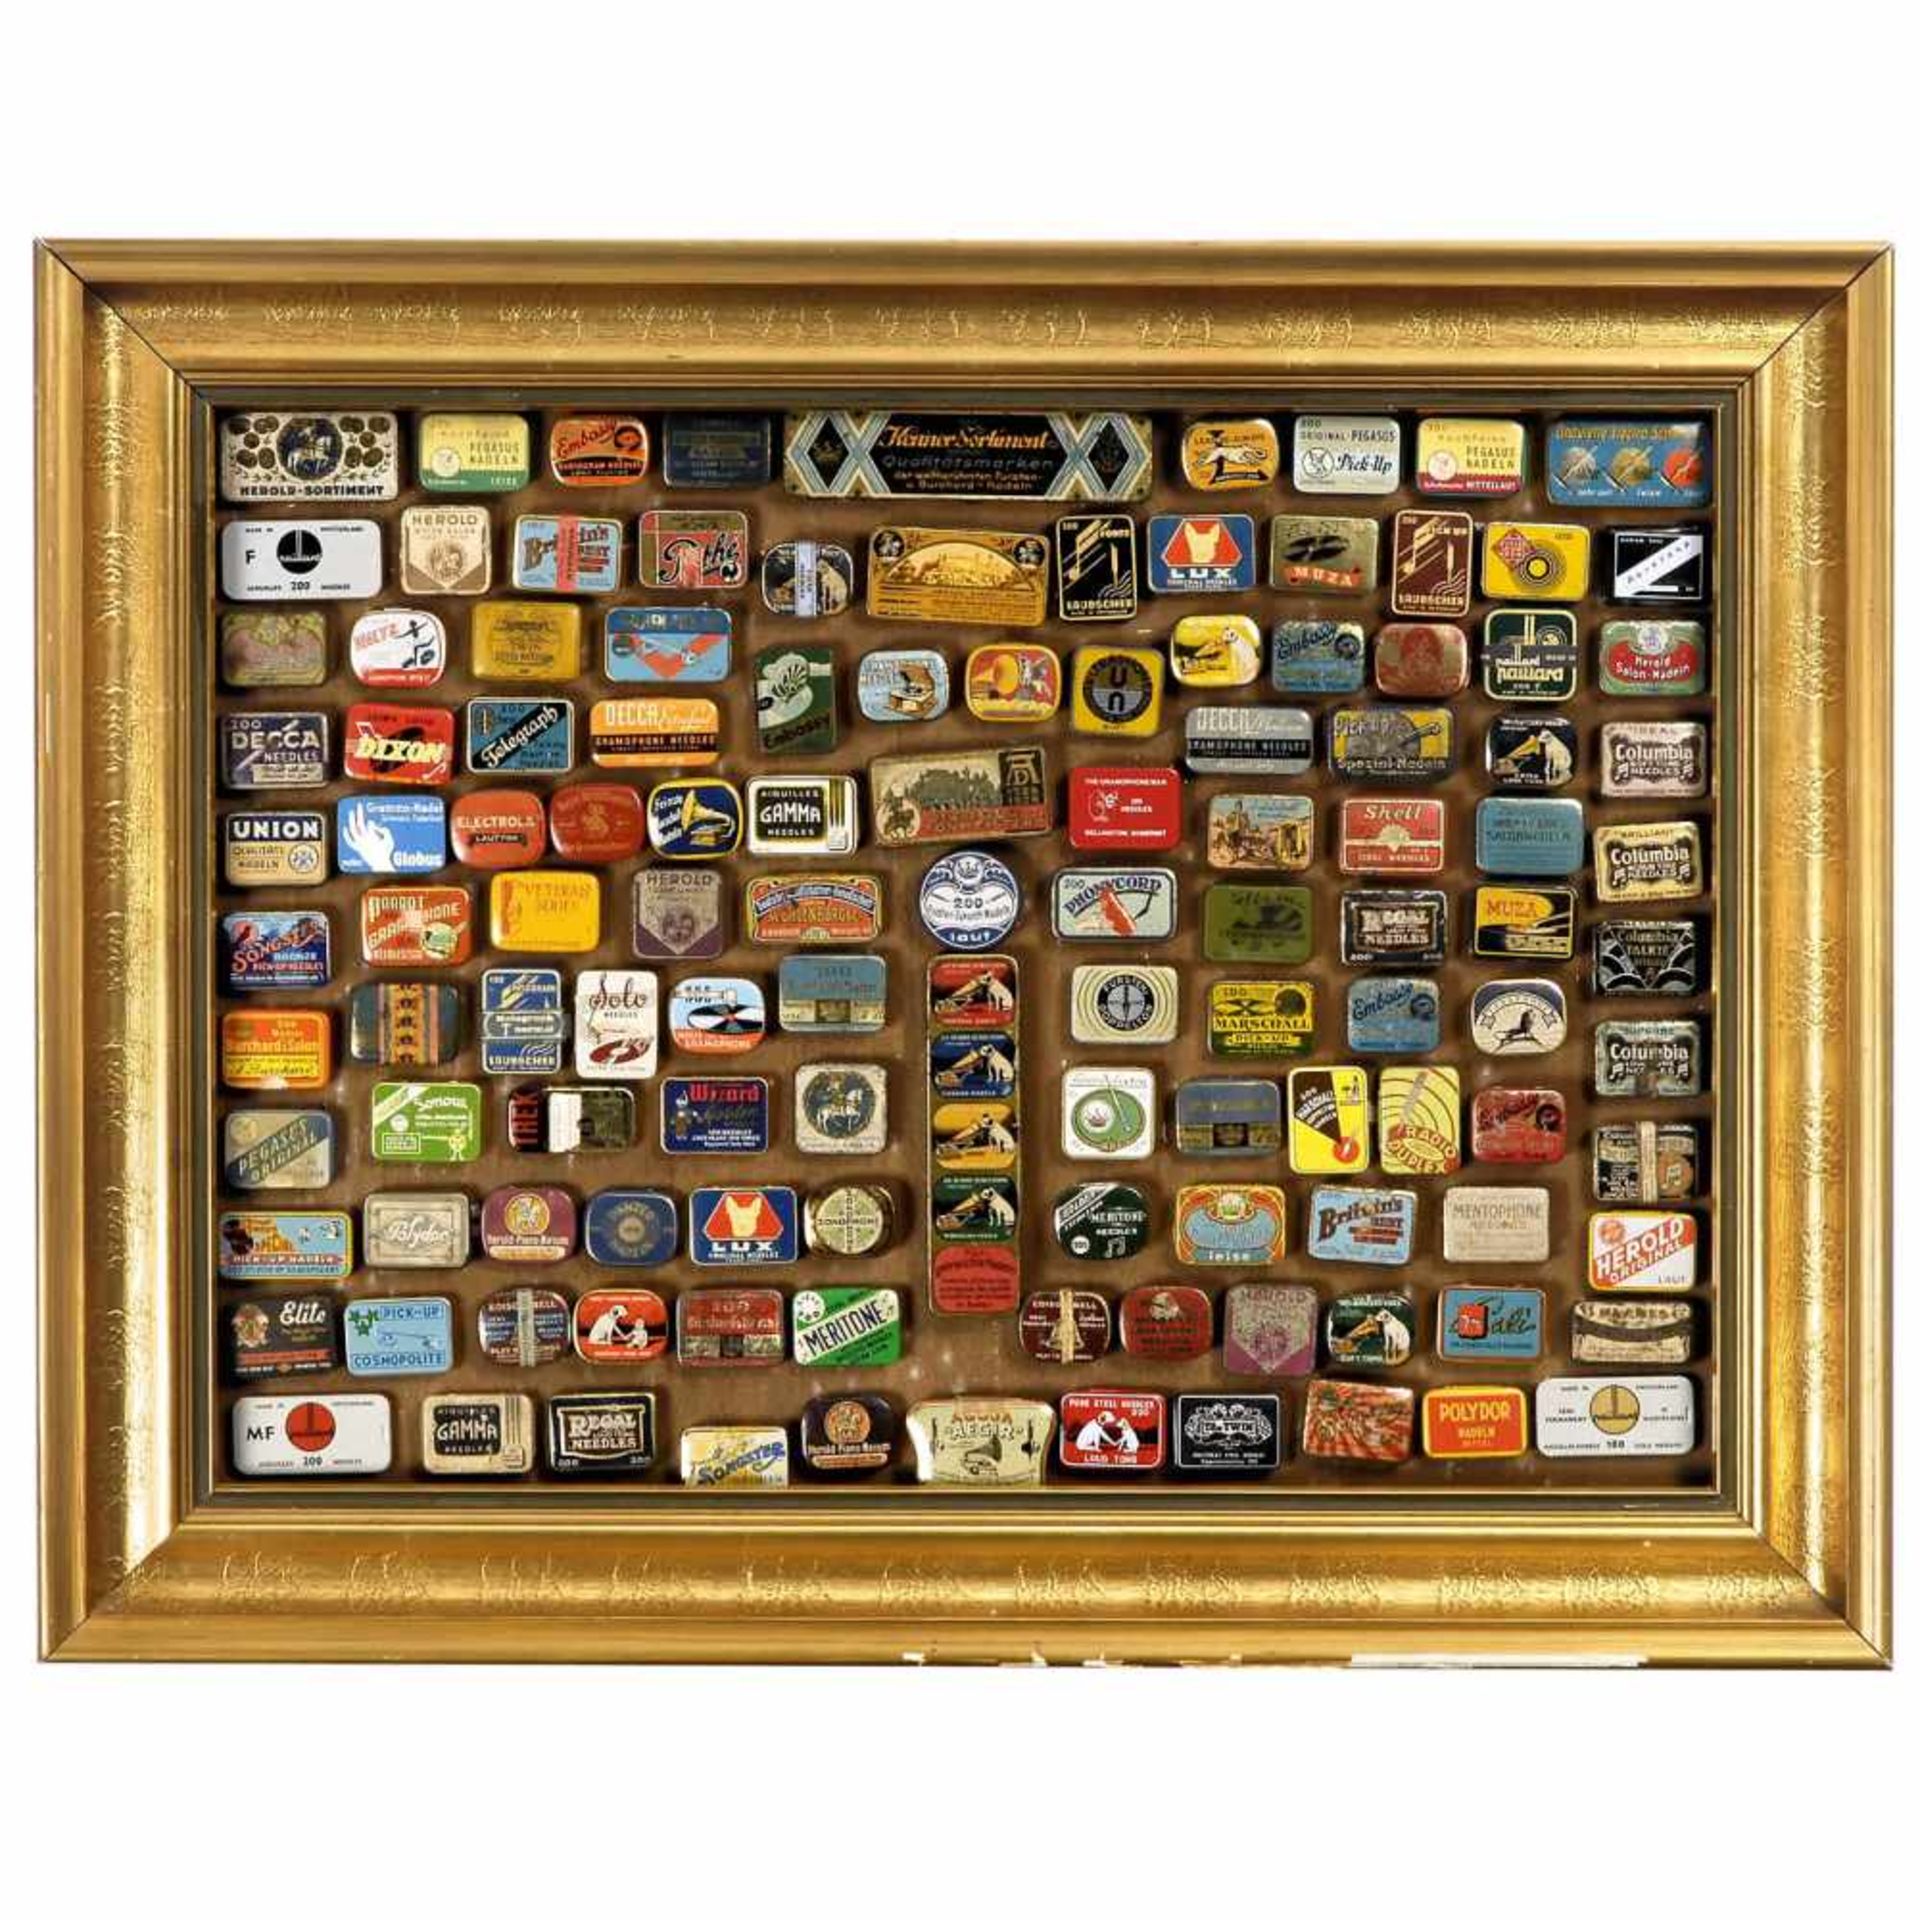 Showcase with 124 Needle TinsGilded frame, size 31 ½ x 24 4/5 in., with assortment tins and